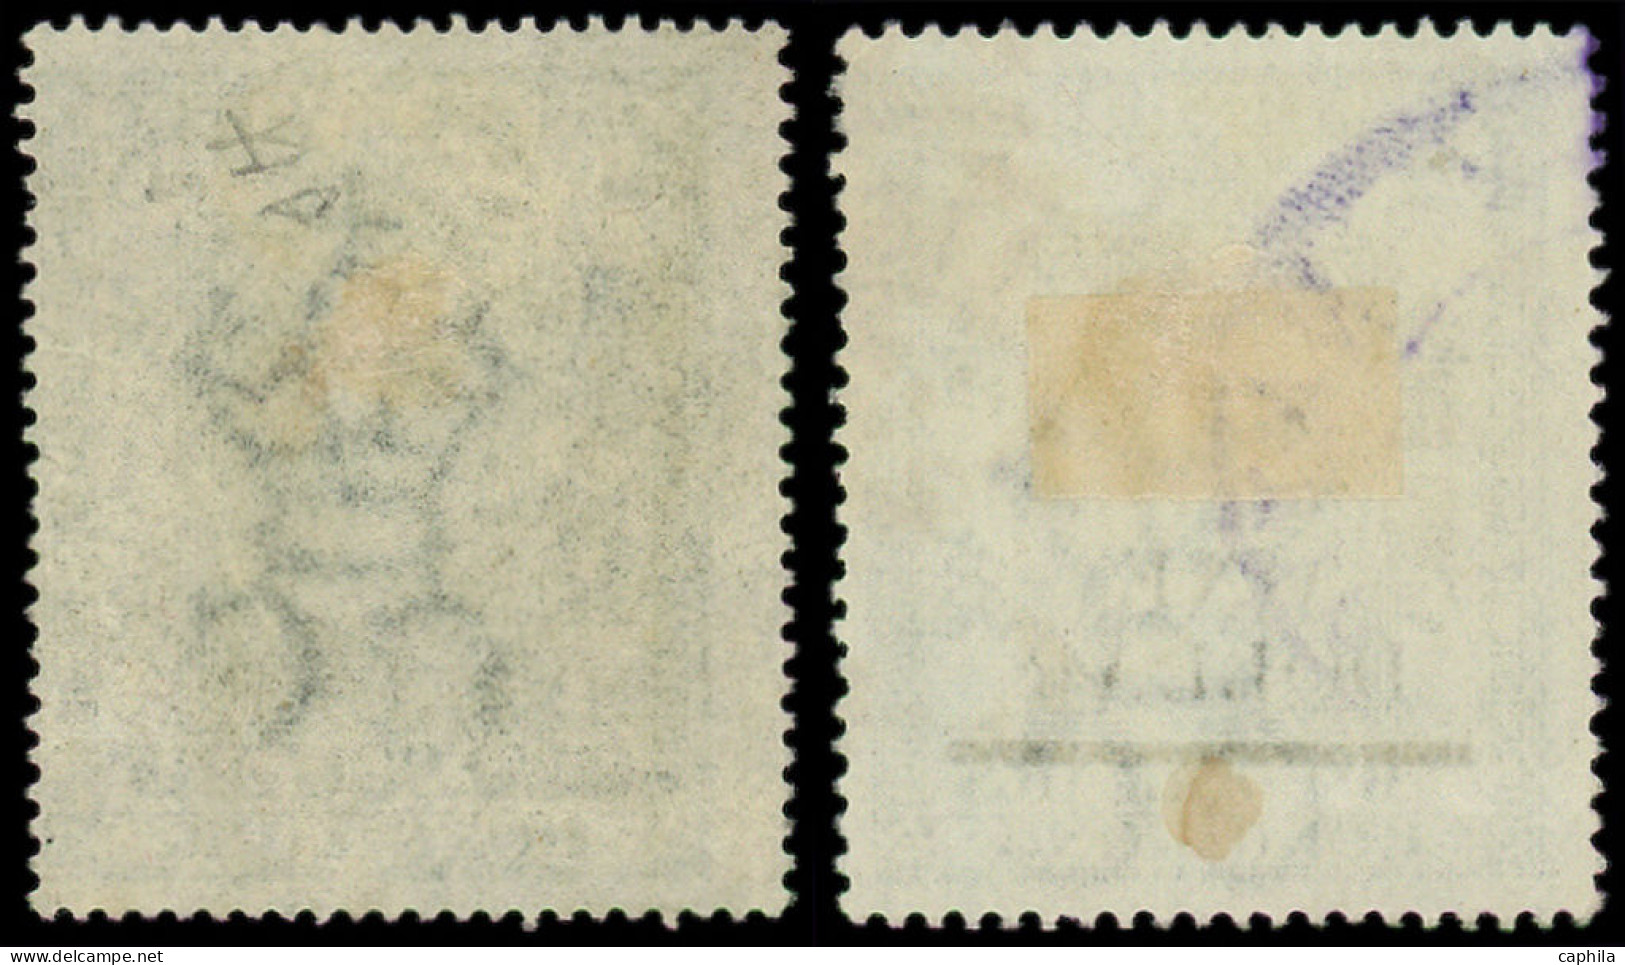 O HONG KONG - Fiscaux Postaux - 8/9 Avec Surcharge Chinoises: Olive Et Vert Clair - Postal Fiscal Stamps